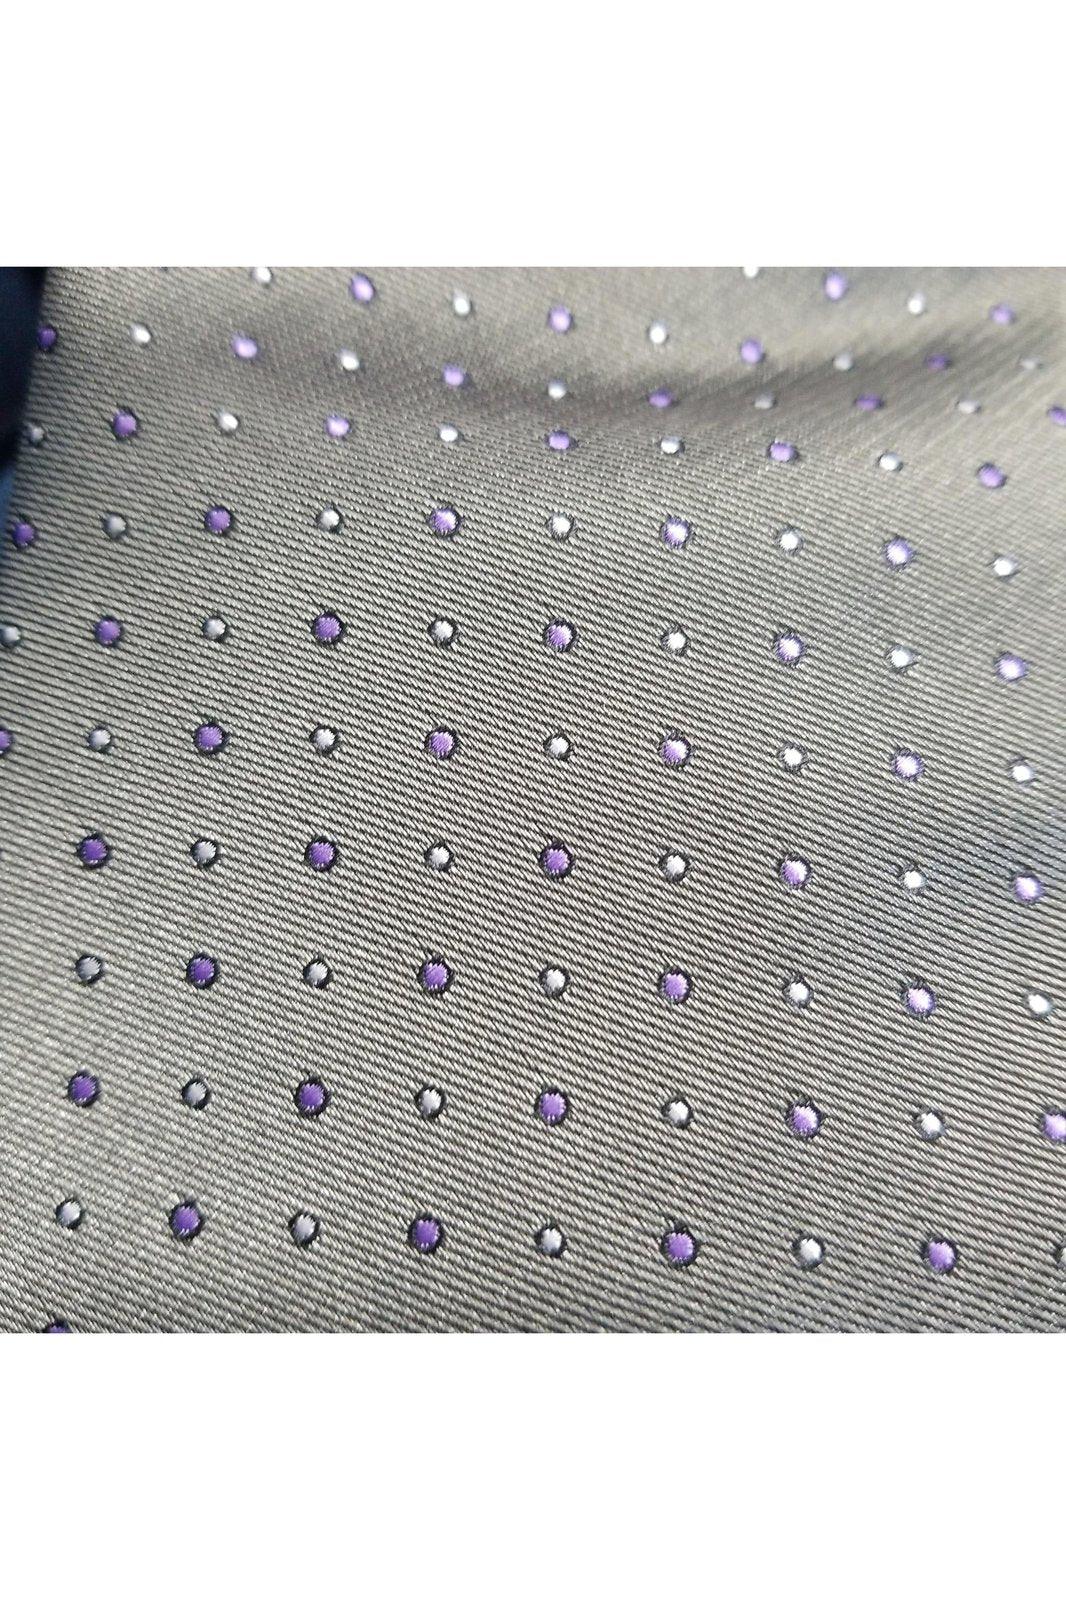 Angelino men's gray and purple polka dot tie and scarf